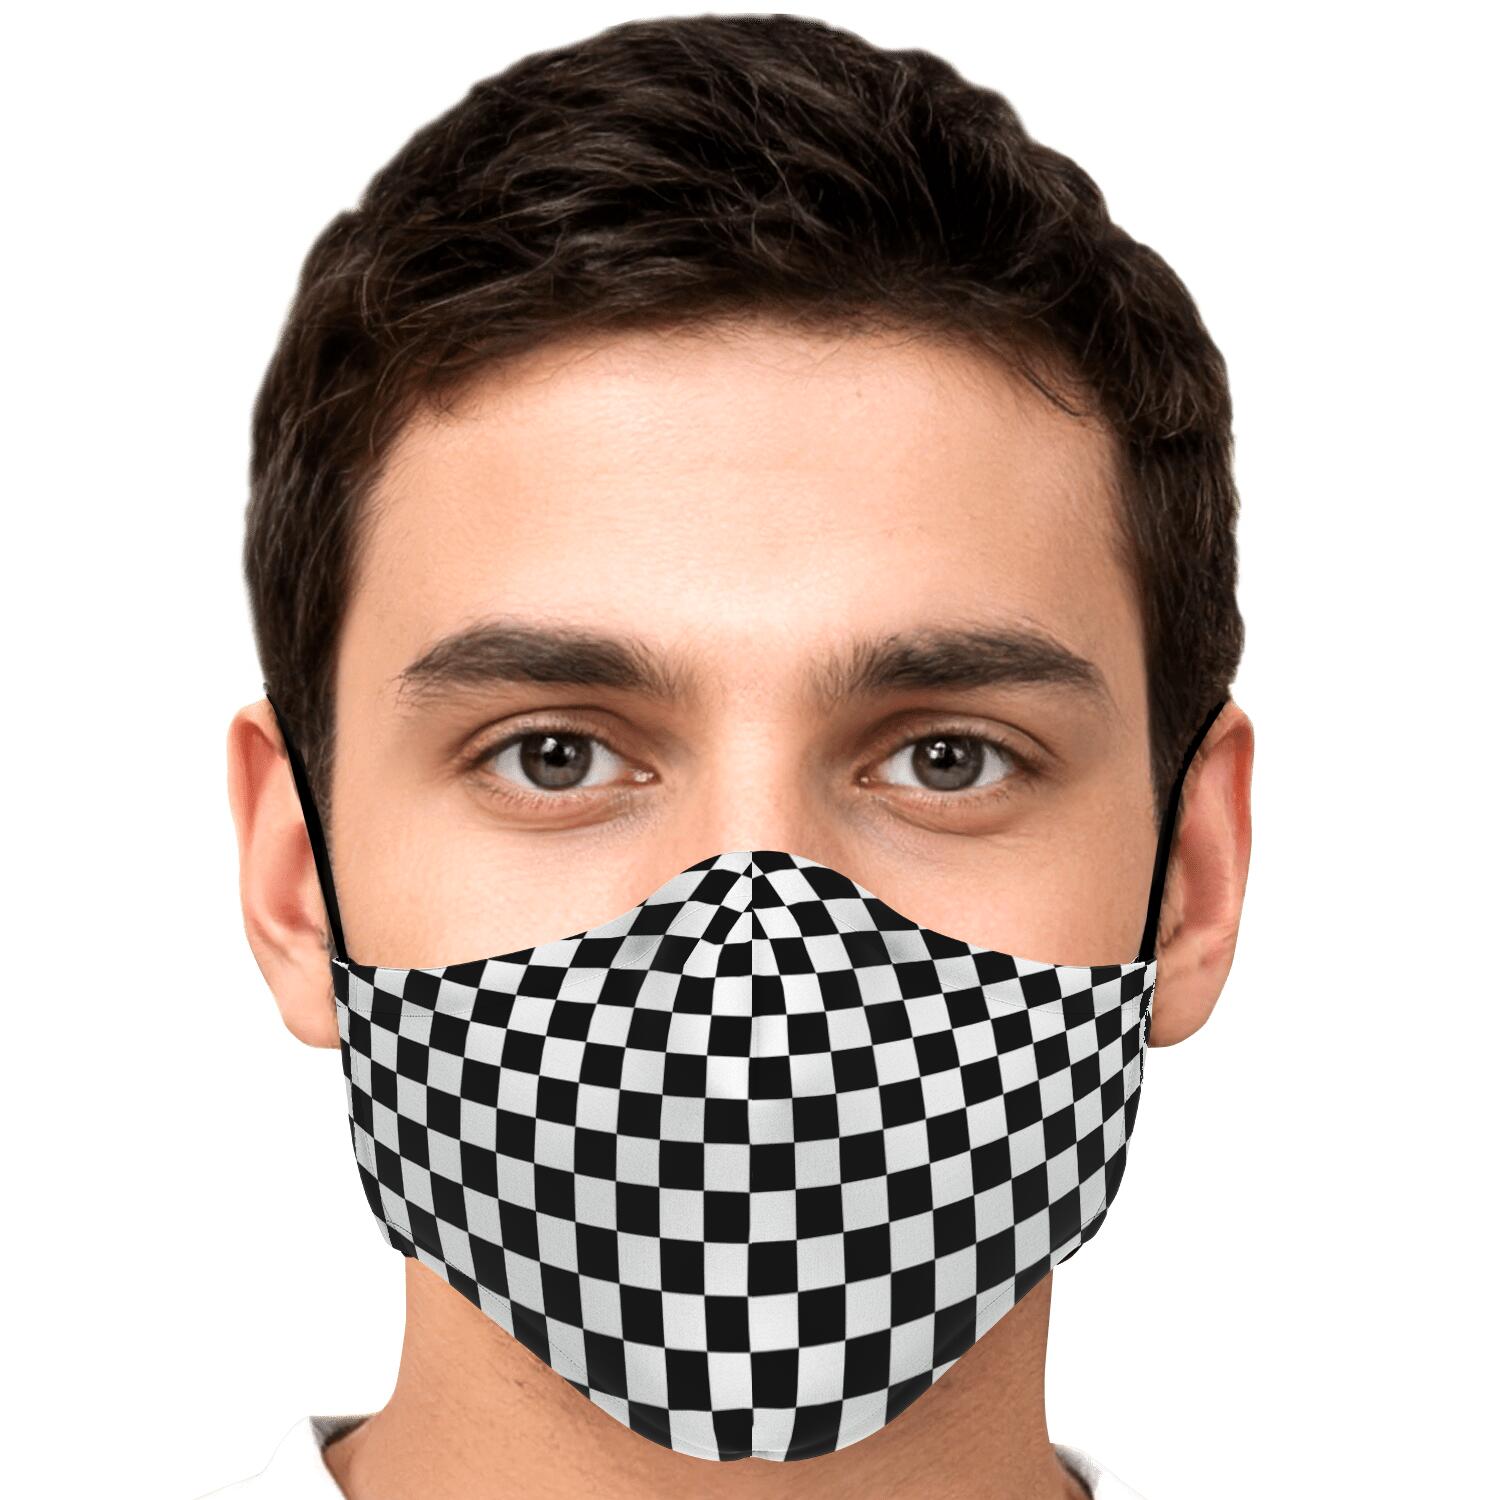 Black White Check Face Mask With Filter, Checkered Gingham Racing Cotton Fabric Cloth Mouth Shield Fashion Half Washable Adult Kids Starcove Fashion